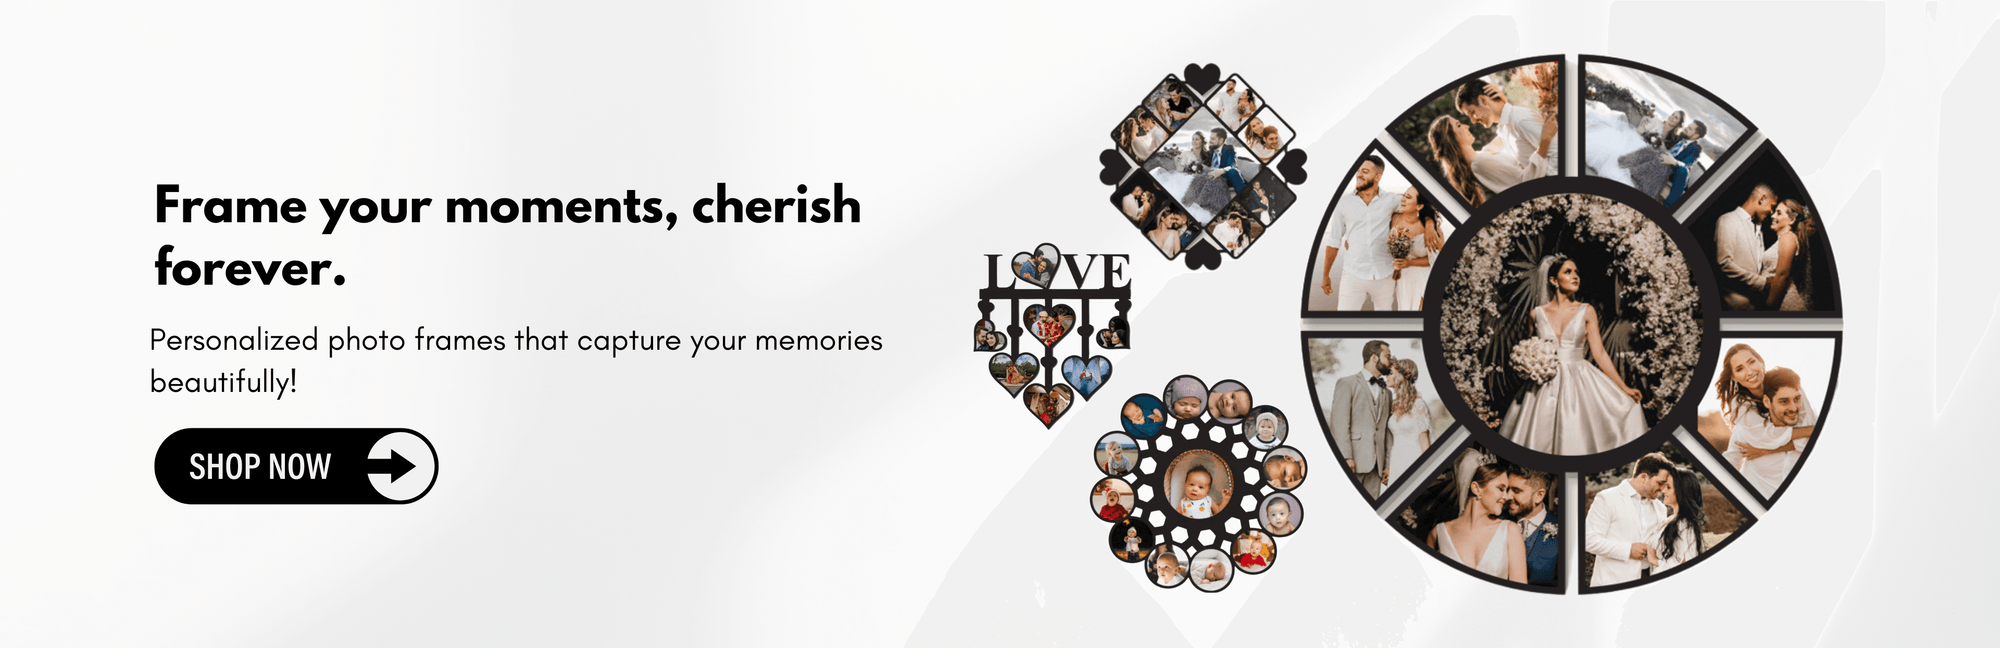 Frame your moments, cherish forever – personalized photo frames that capture your memories beautifully!